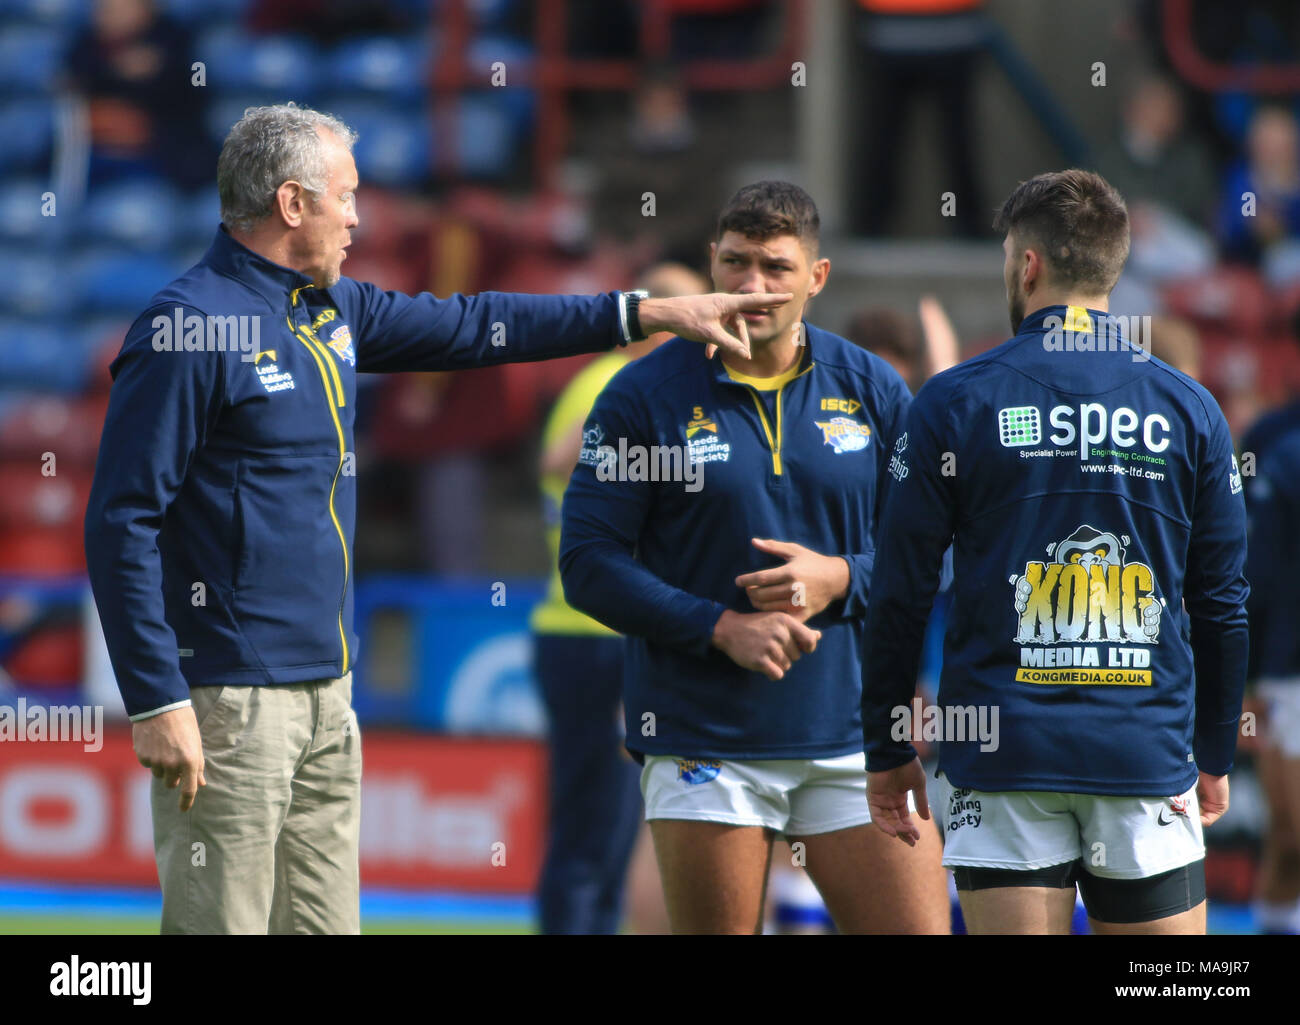 30th March 2018 , John Smiths Stadium, Huddersfield, England; Betfred Super League rugby, Round 8 Huddersfield Giants v Leeds Rhinos; Brian McDermott giving final instructions before the game with the Huddersfield Giants Credit: News Images/Alamy Live News Stock Photo